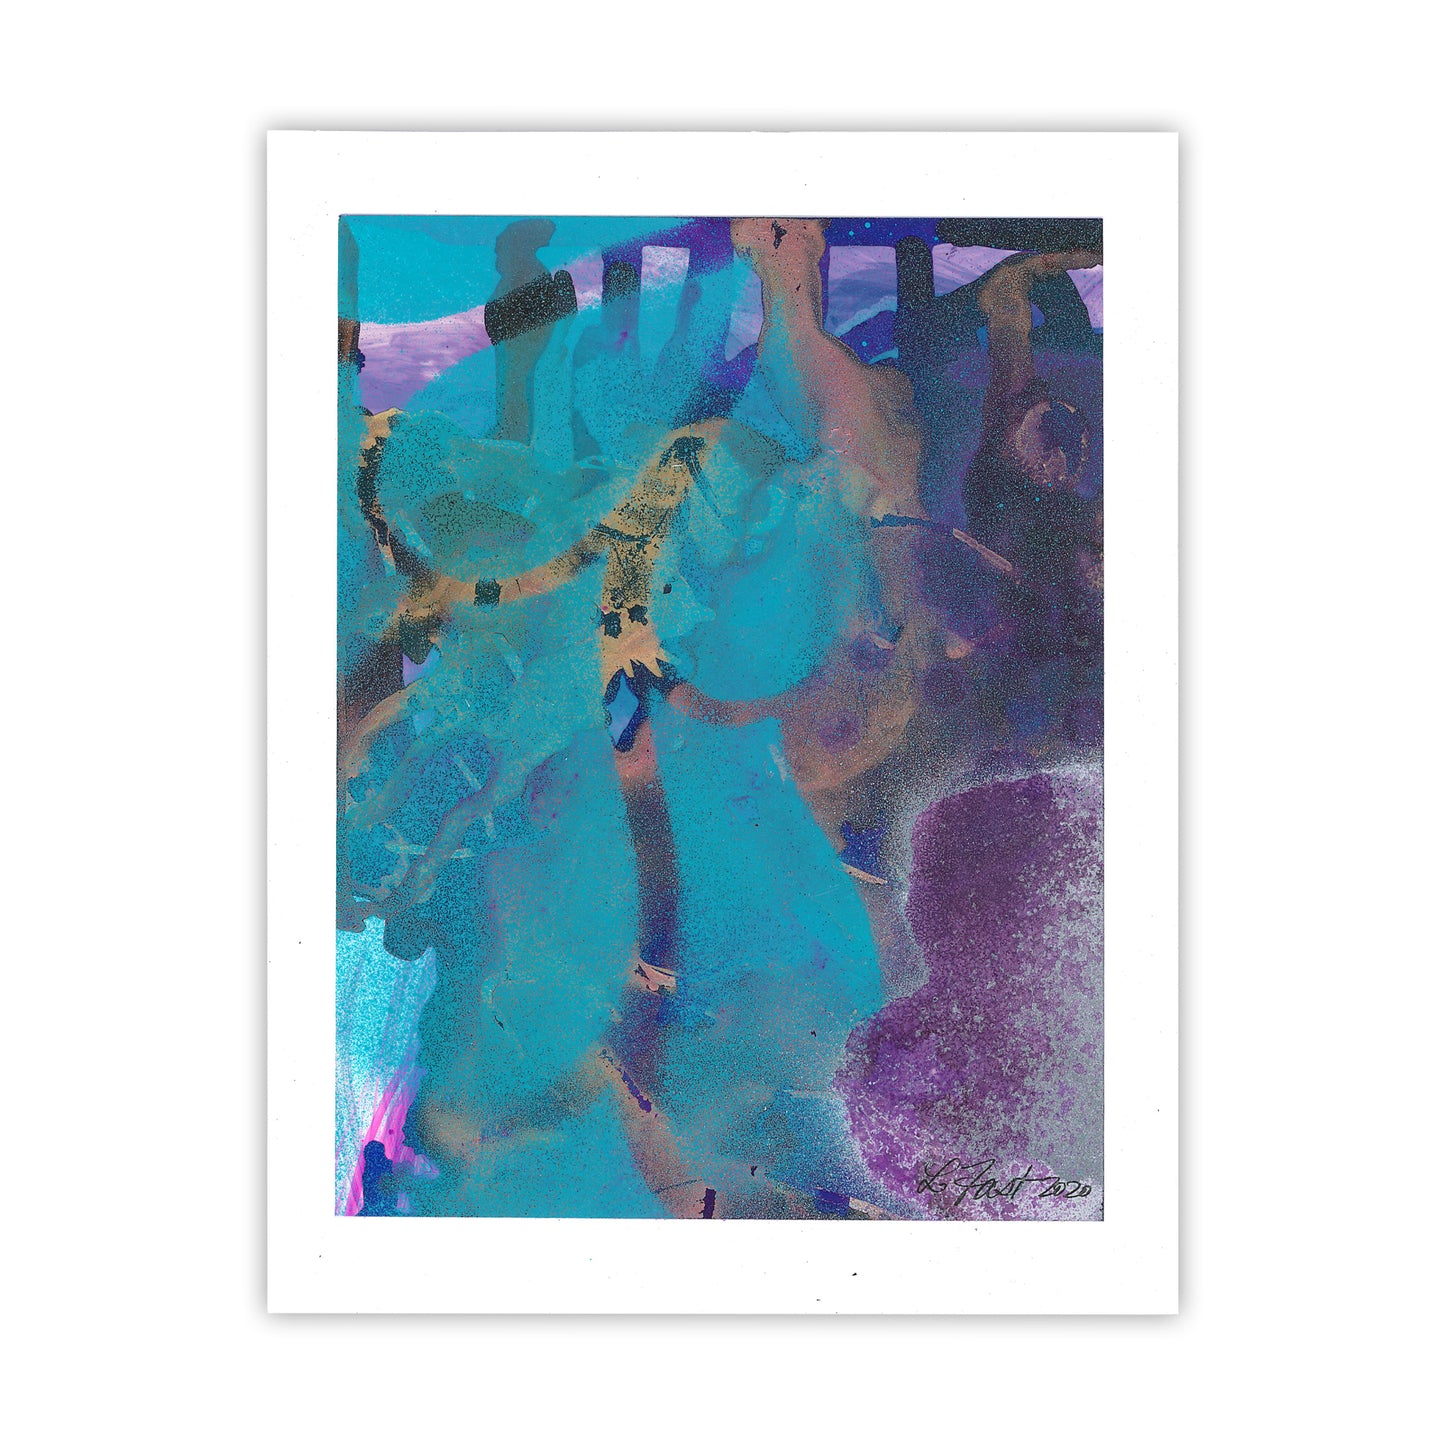 Alcohol Ink Greeting Cards